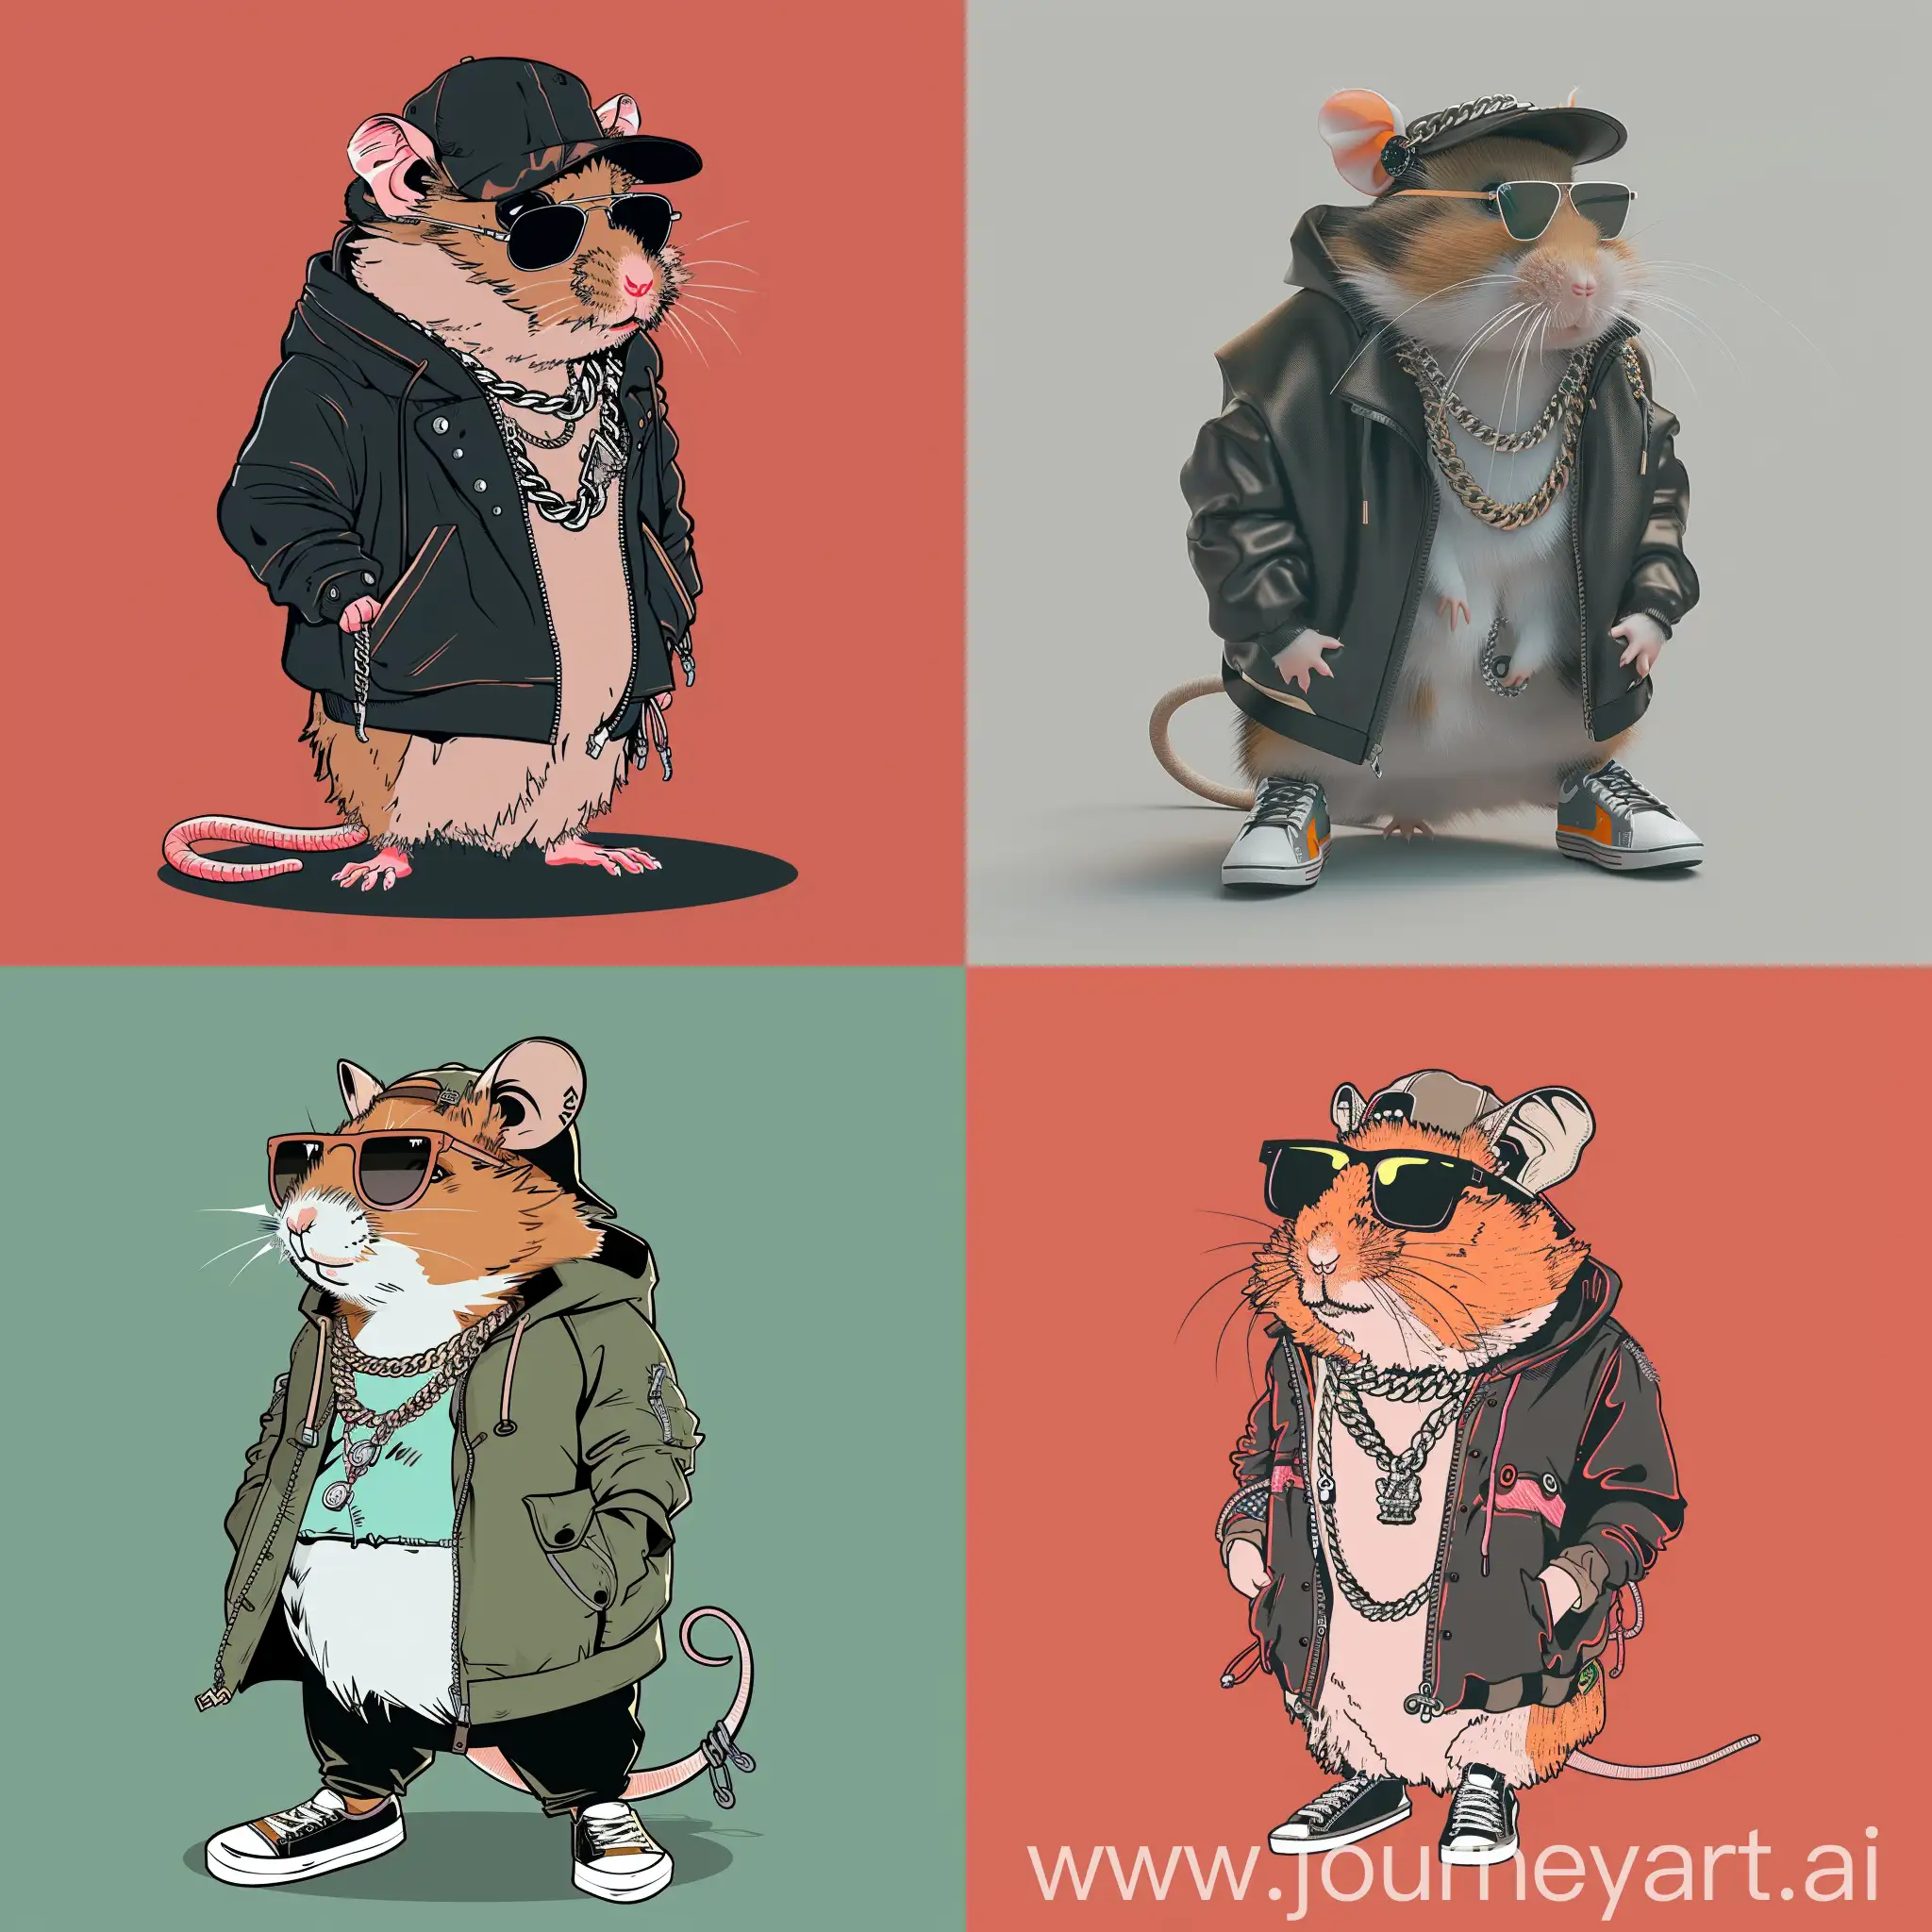 Create an image of a cool hamster dressed in drip-style clothing. The hamster should be wearing trendy, streetwear fashion with a confident pose. Include elements like a stylish jacket, sunglasses, sneakers, and maybe a chain or hat. The overall vibe should be modern and edgy.